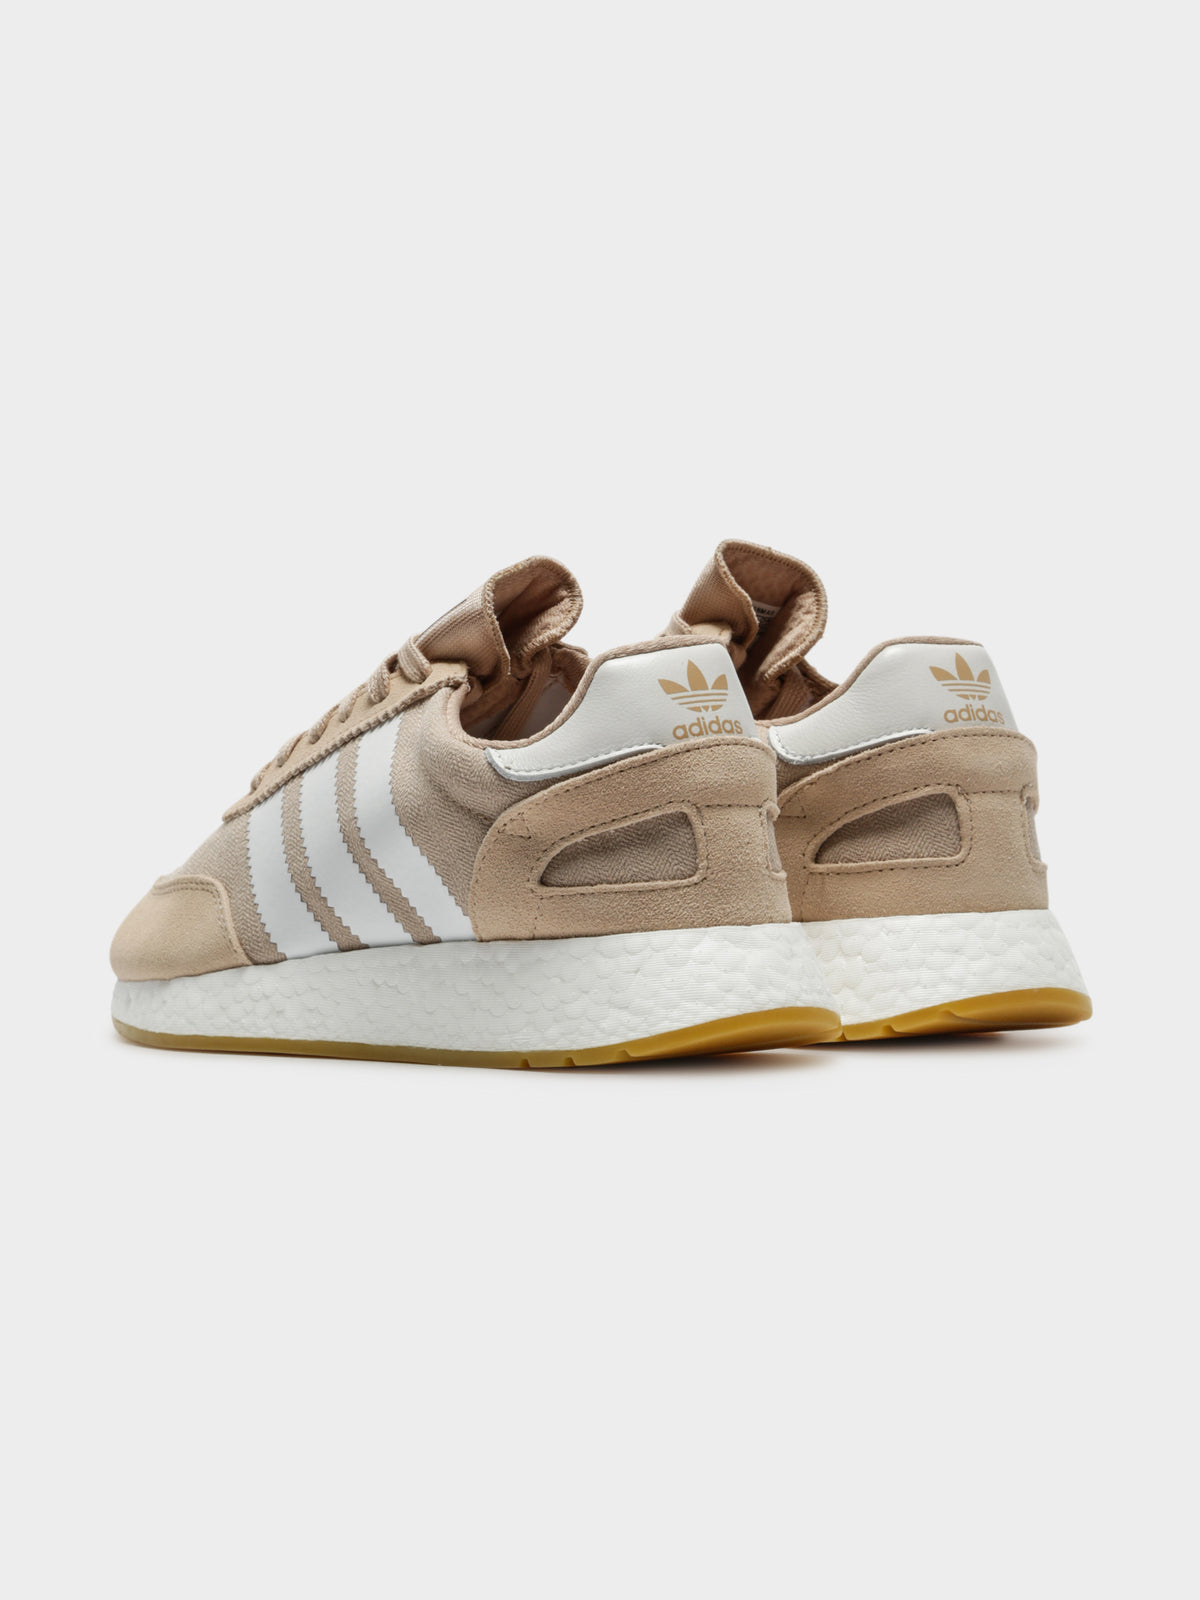 Womens I-5923 Sneakers in Nude